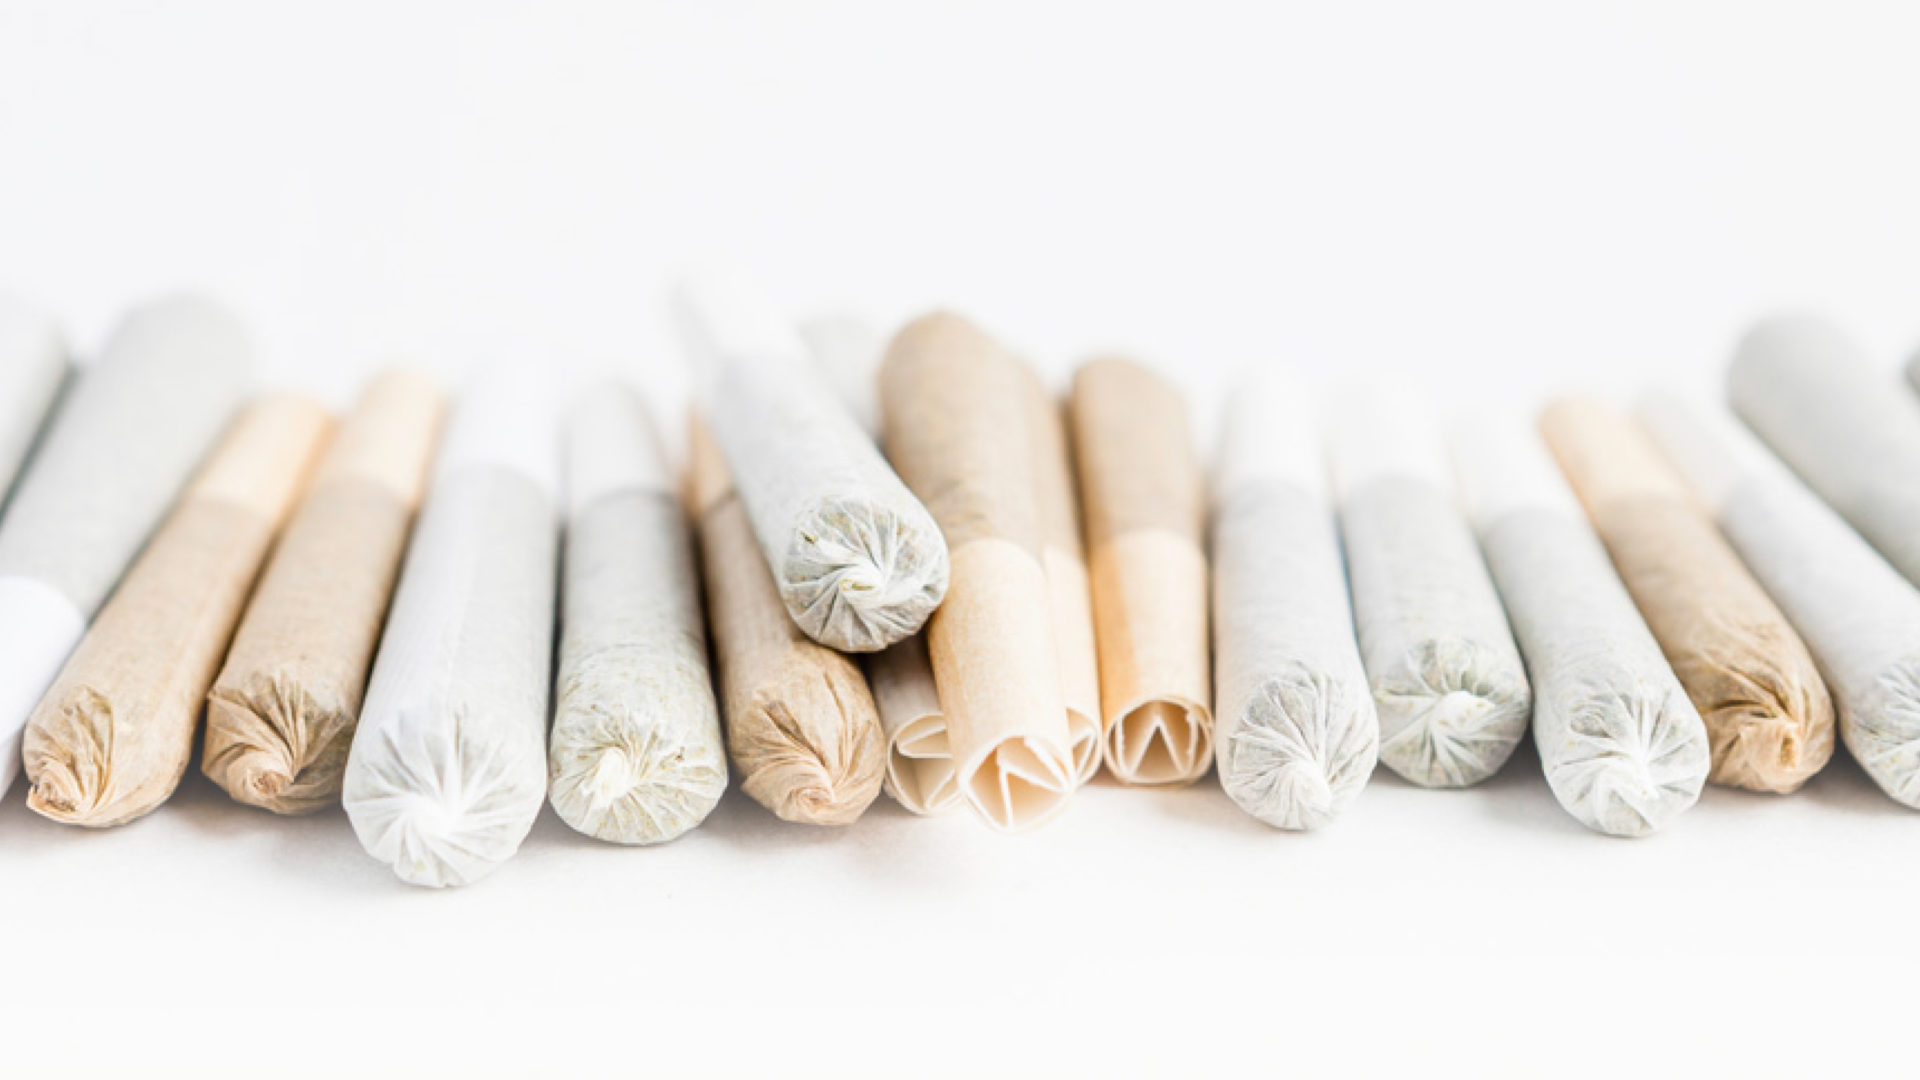 Collection of Marijuana Joints on a White Background